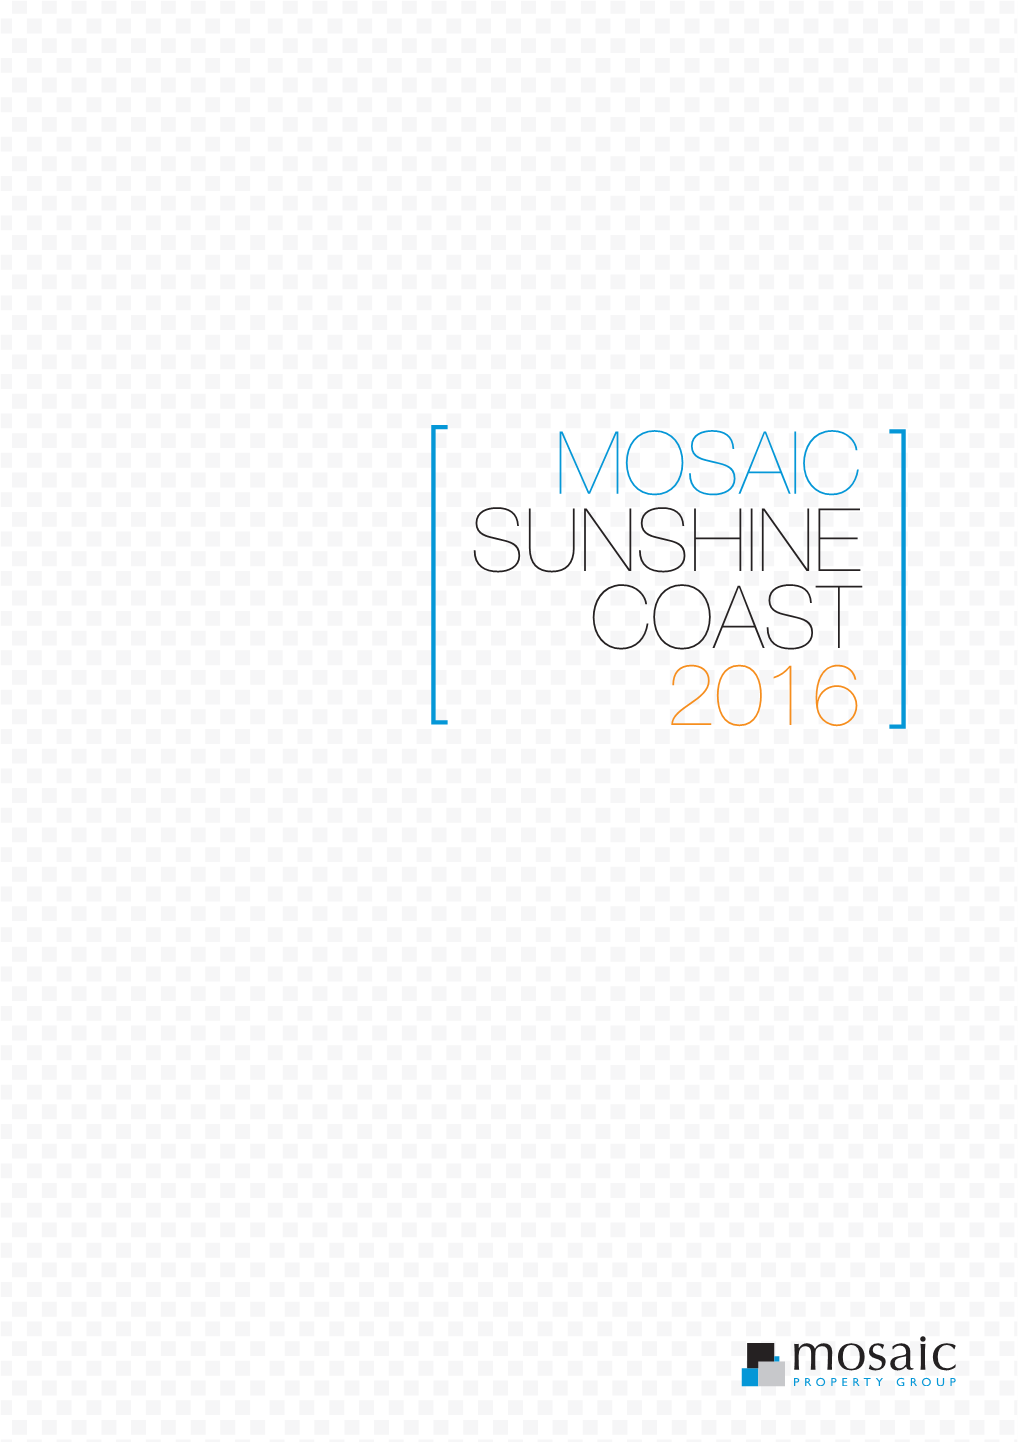 MOSAIC SUNSHINE COAST 2016 Mosaic Is Currently Finalising Their Strategy to Invest Sustainably in the Sunshine Coast Over the Long Term